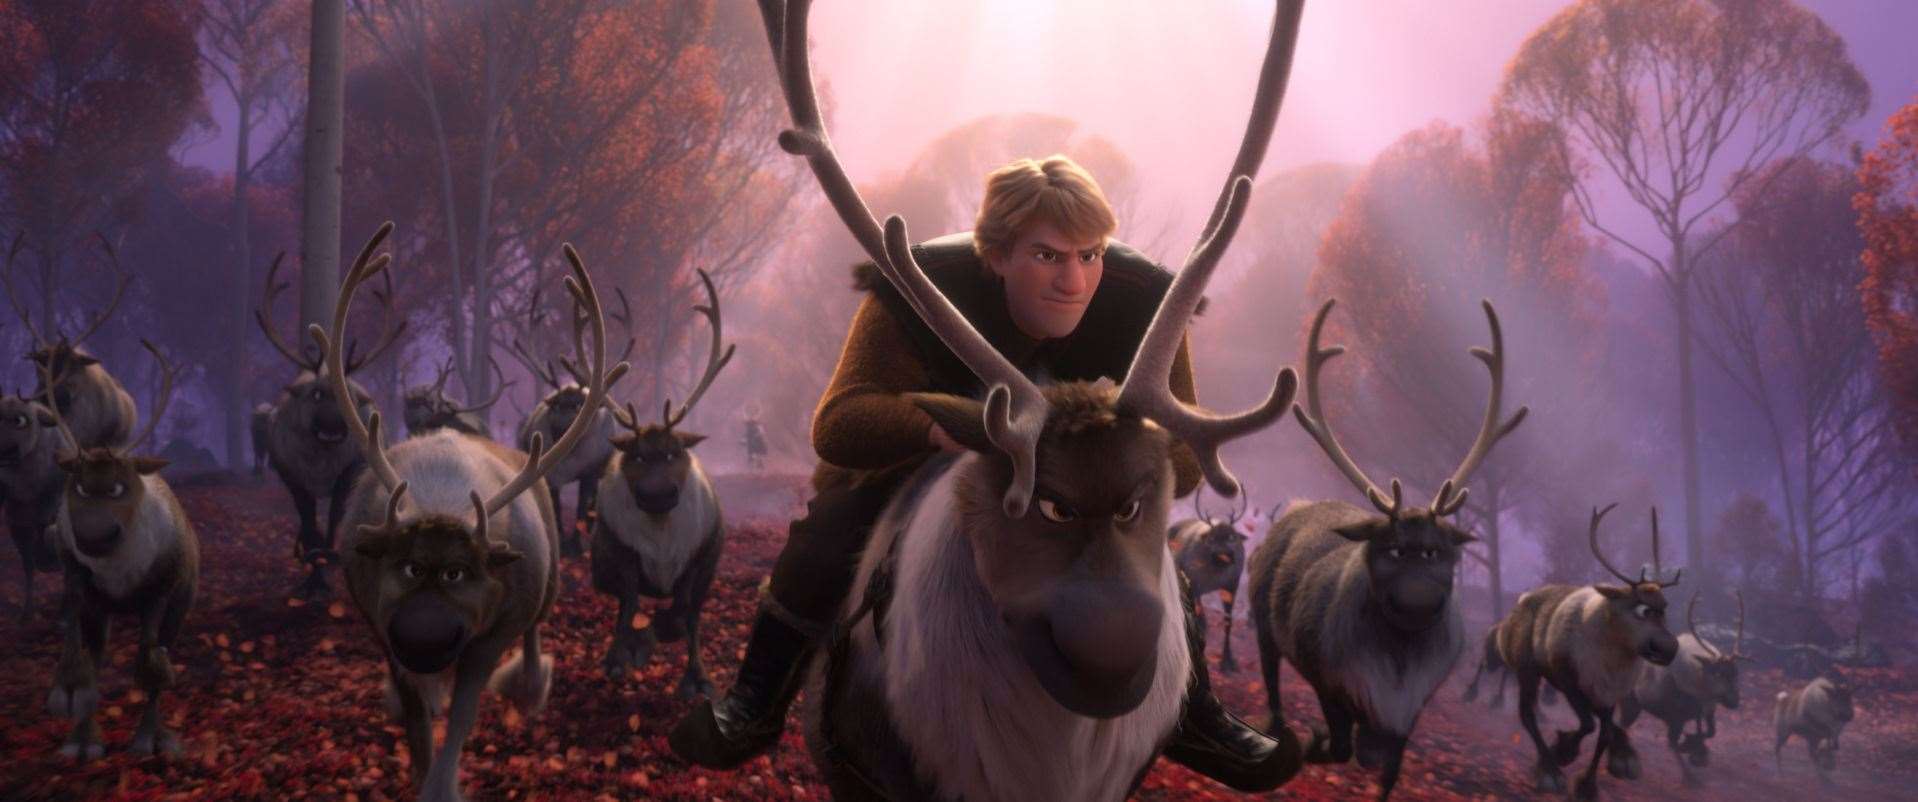 Kristoff (voiced by Jonathan Groff) and Sven the reindeer